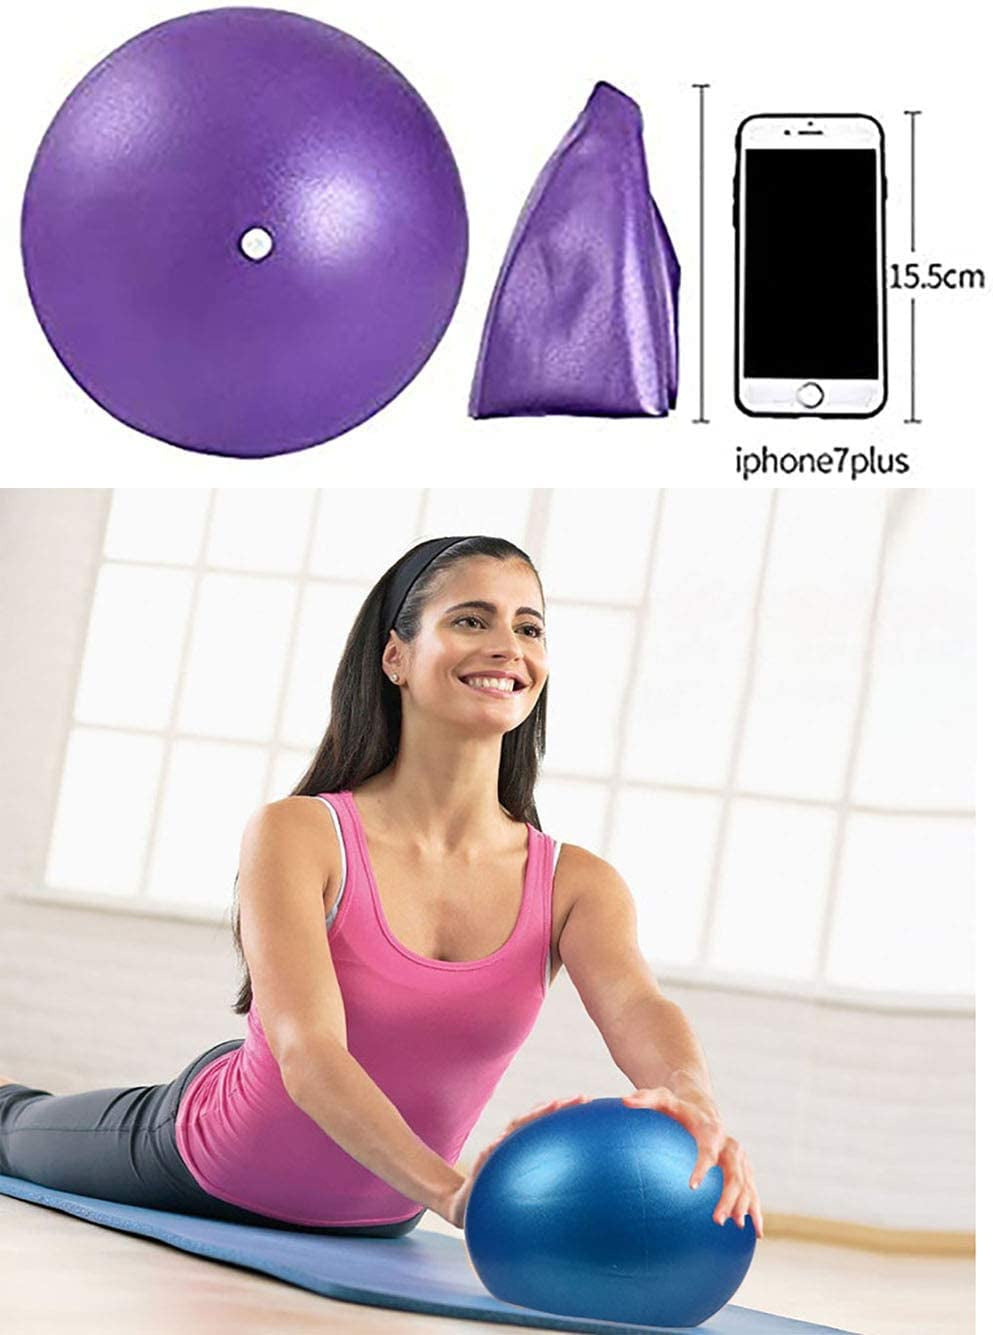  9 Inch Mini Fitness Exercise Yoga Ball for Pilates Physical Core Therapy Training